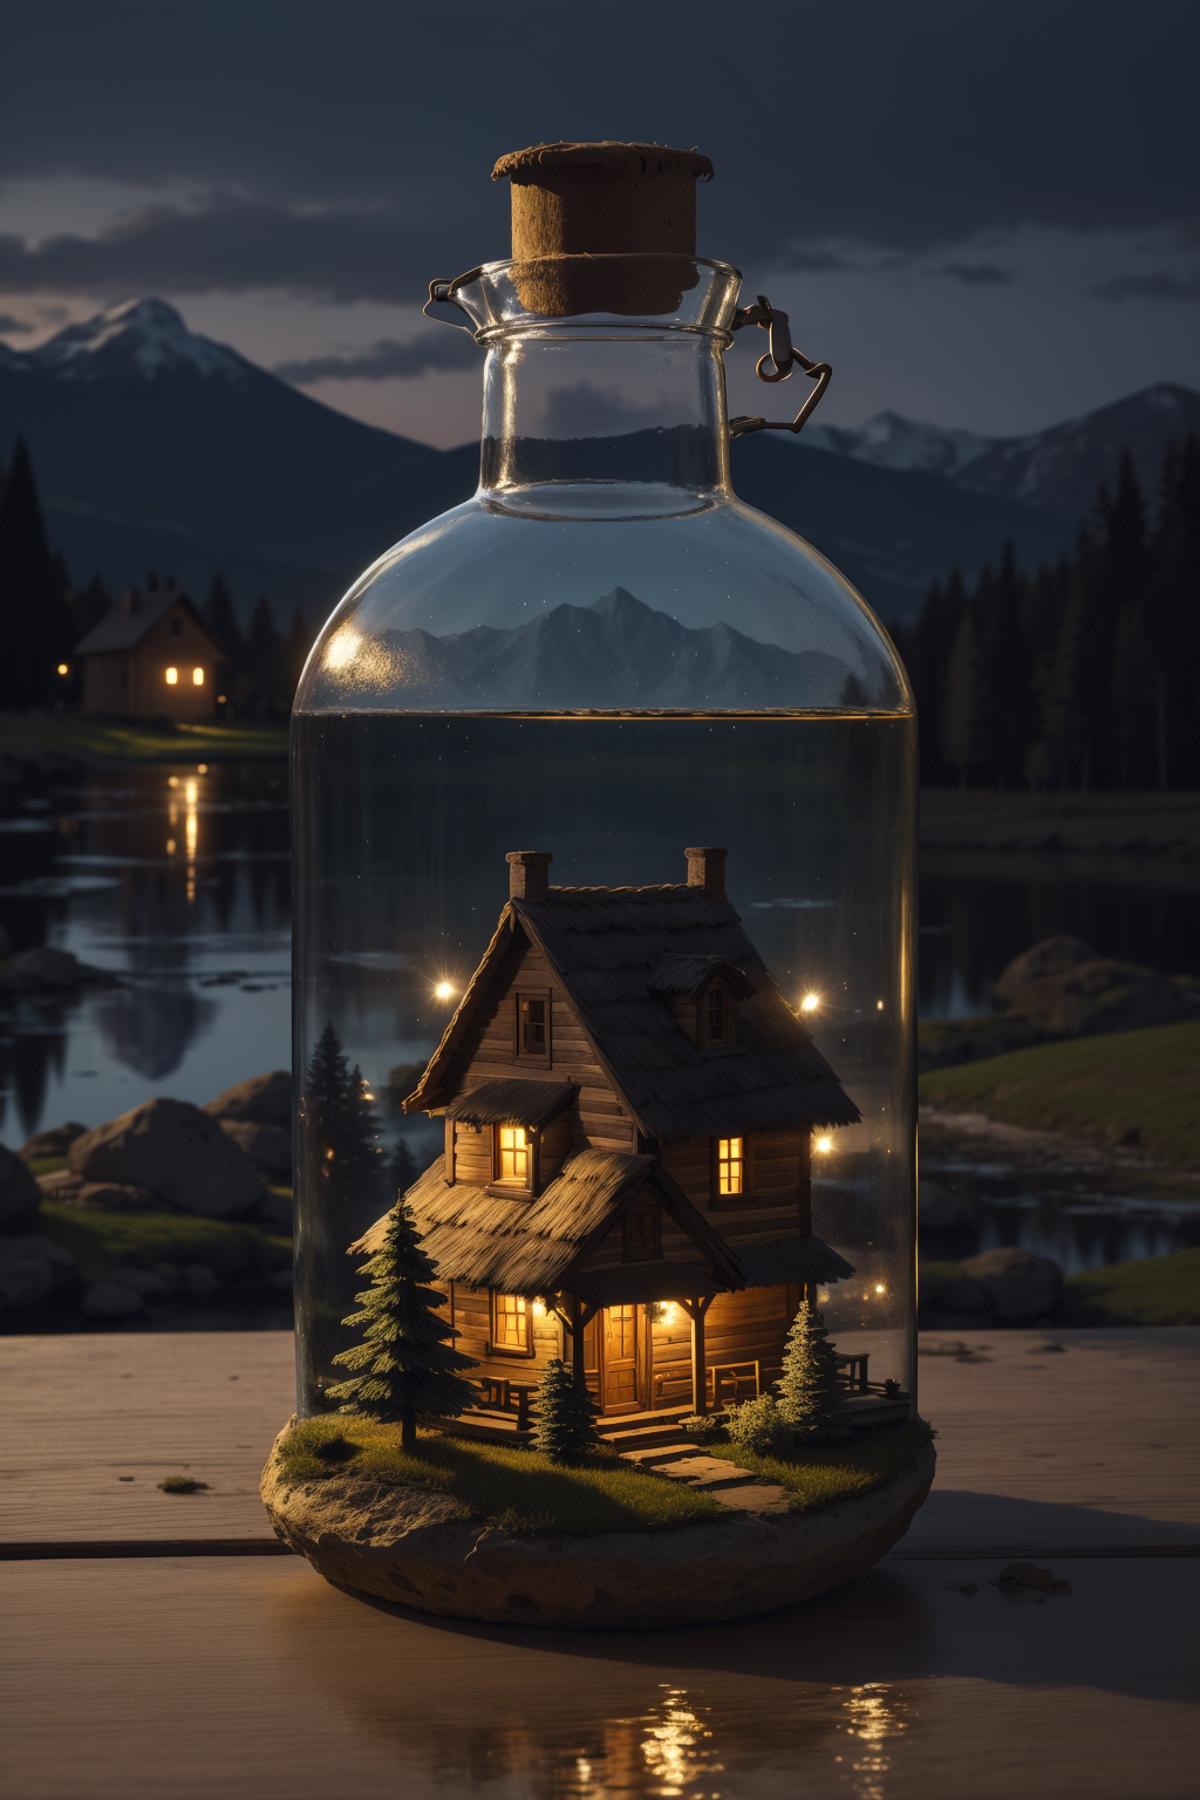 A miniature wooden house inside a glass bottle with a mountainous background.